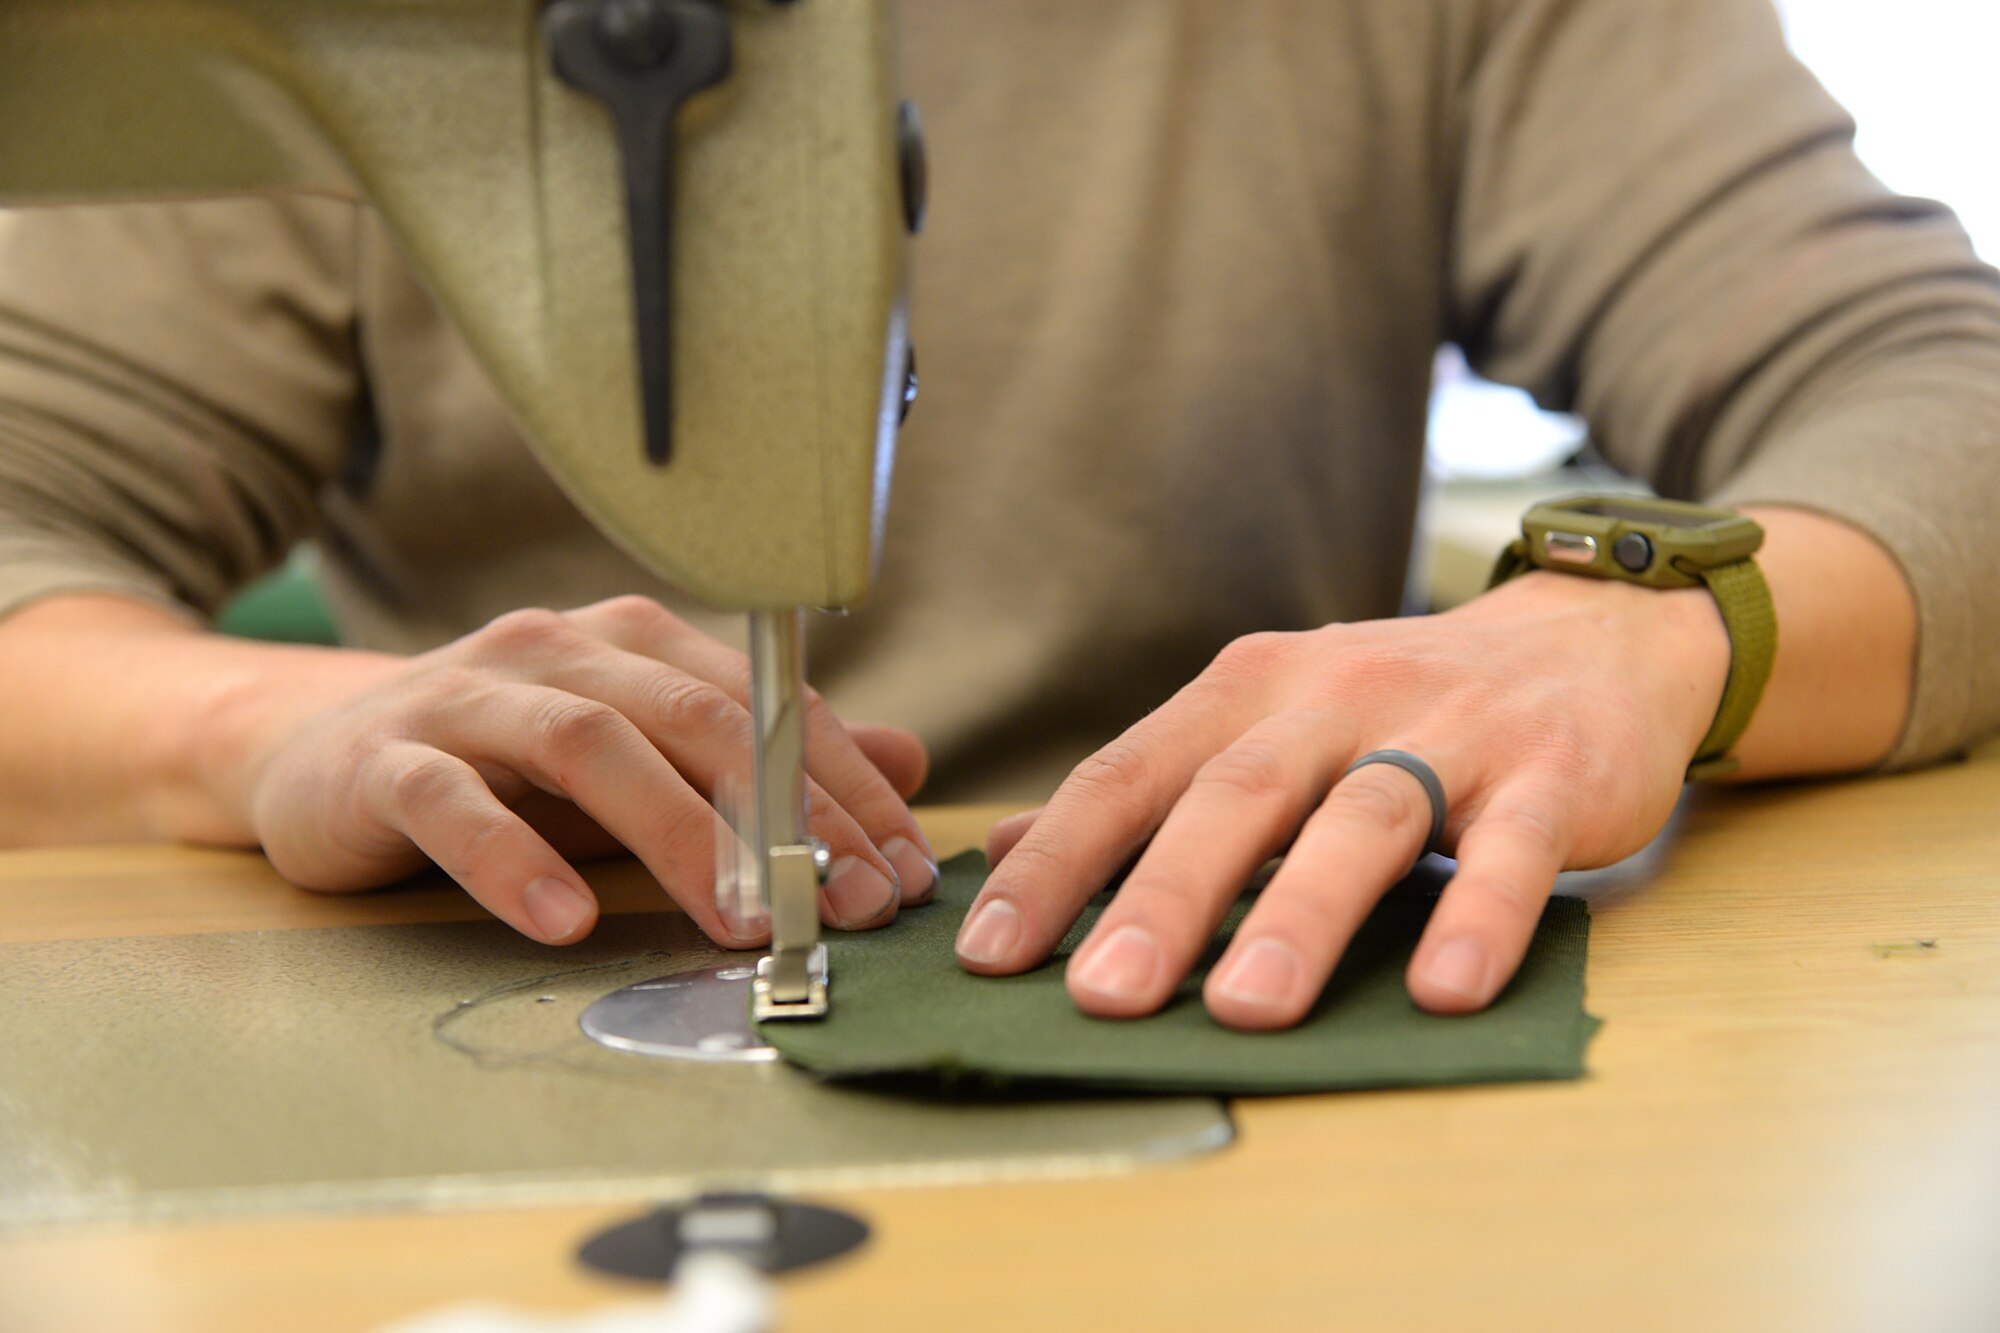 A picture of U.S. Air Force Master Sgt. Kyle P. Brier sewing face masks.